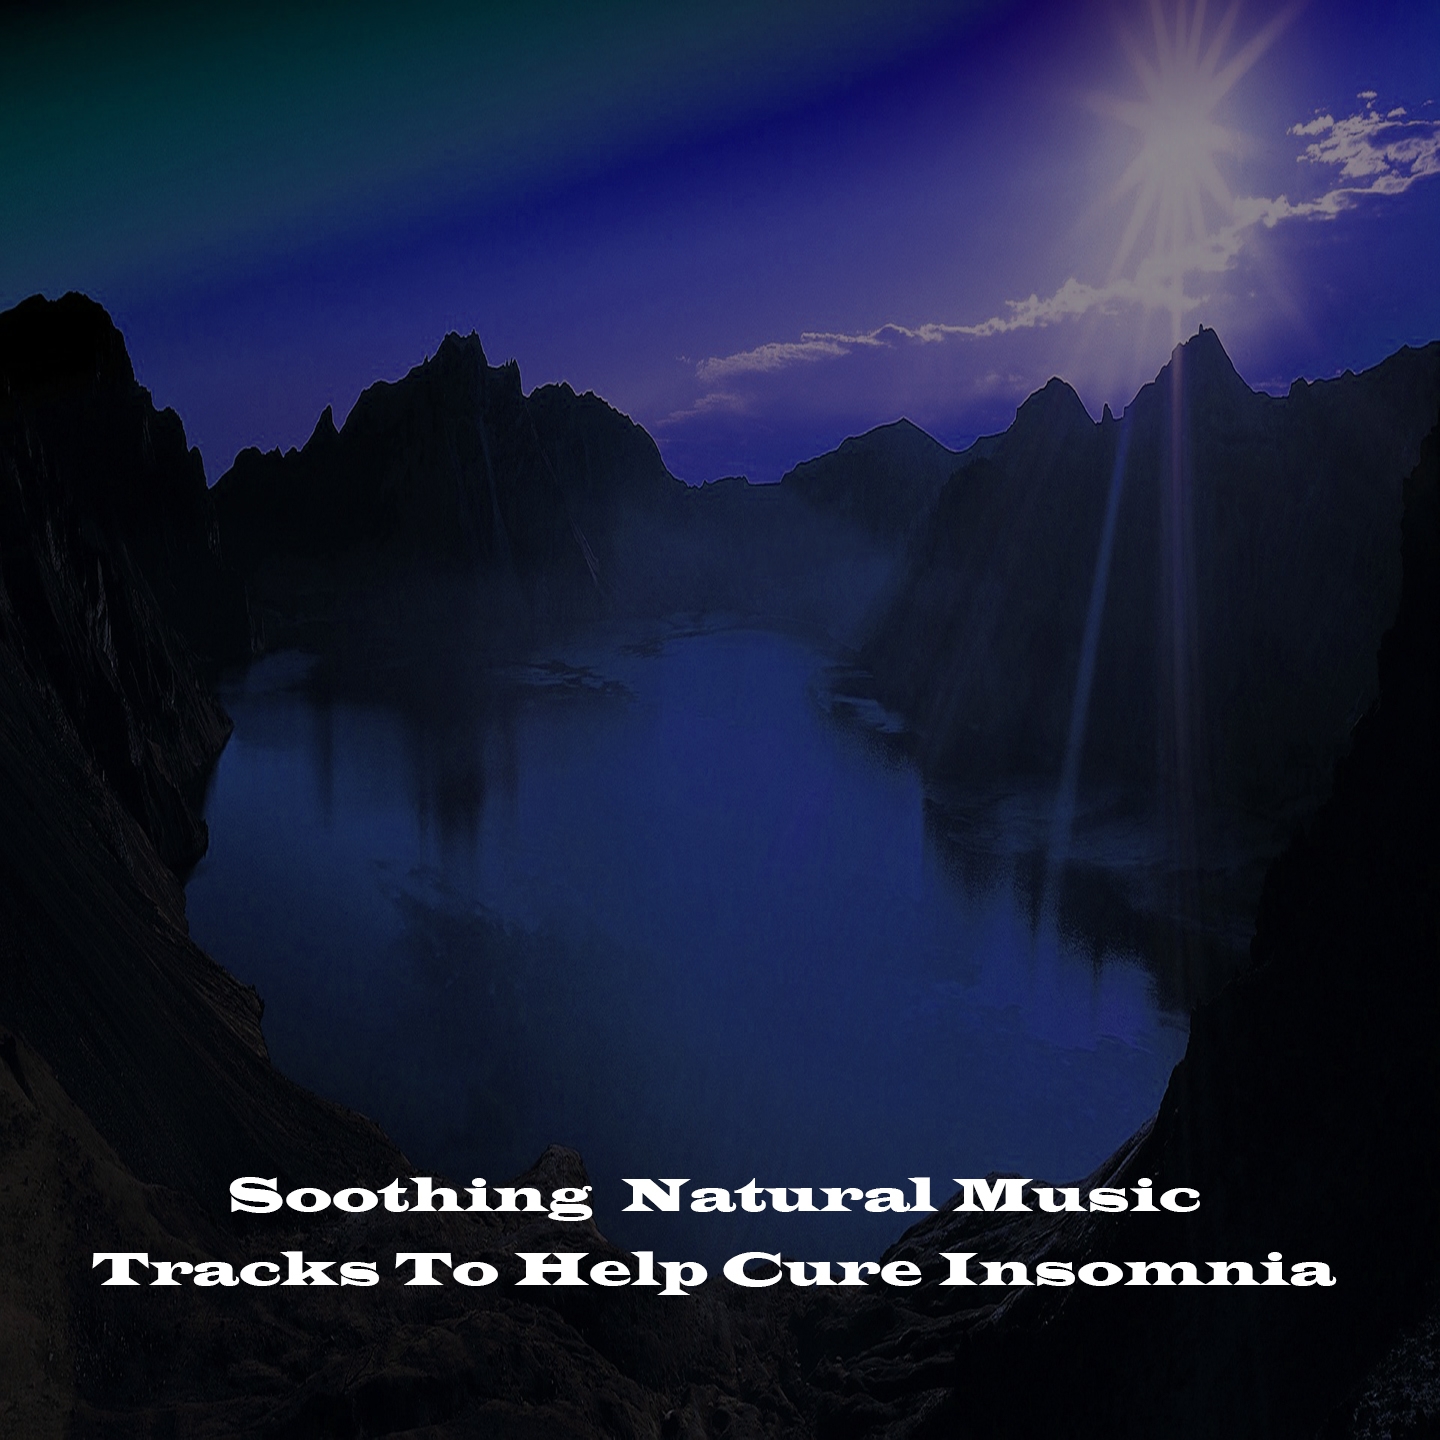 Soothing Natural Music Tracks To Help Cure Insomnia